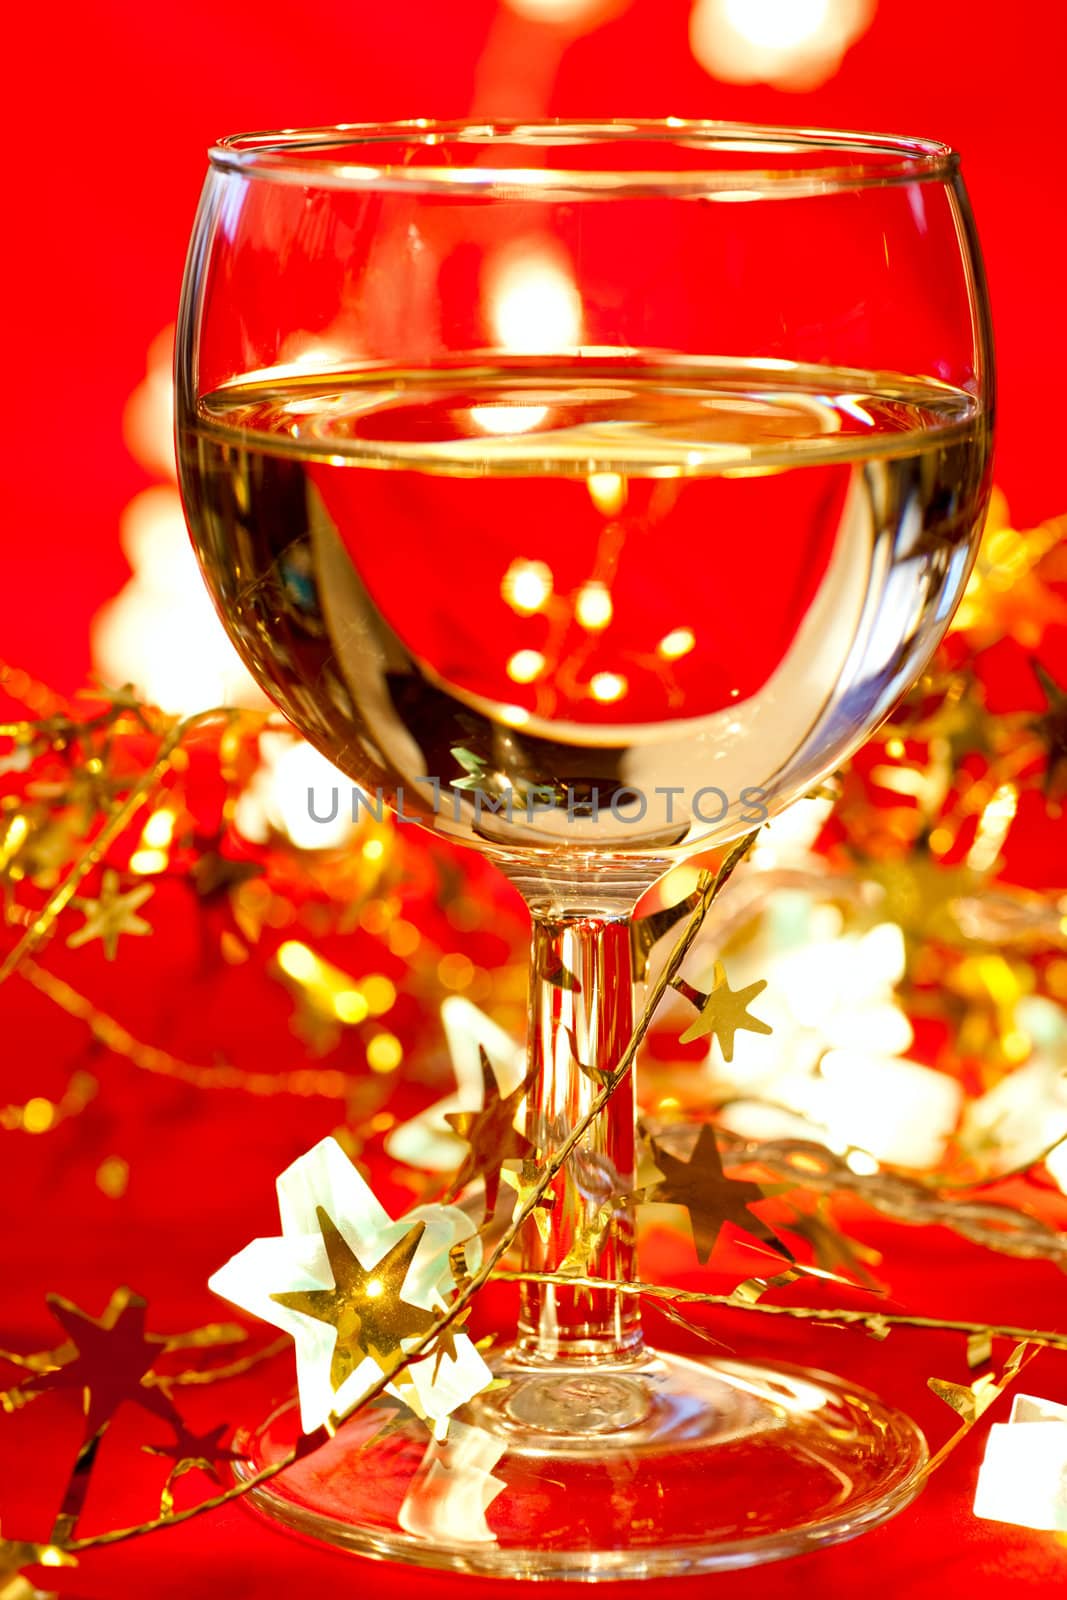 Wineglass with decoration by naumoid